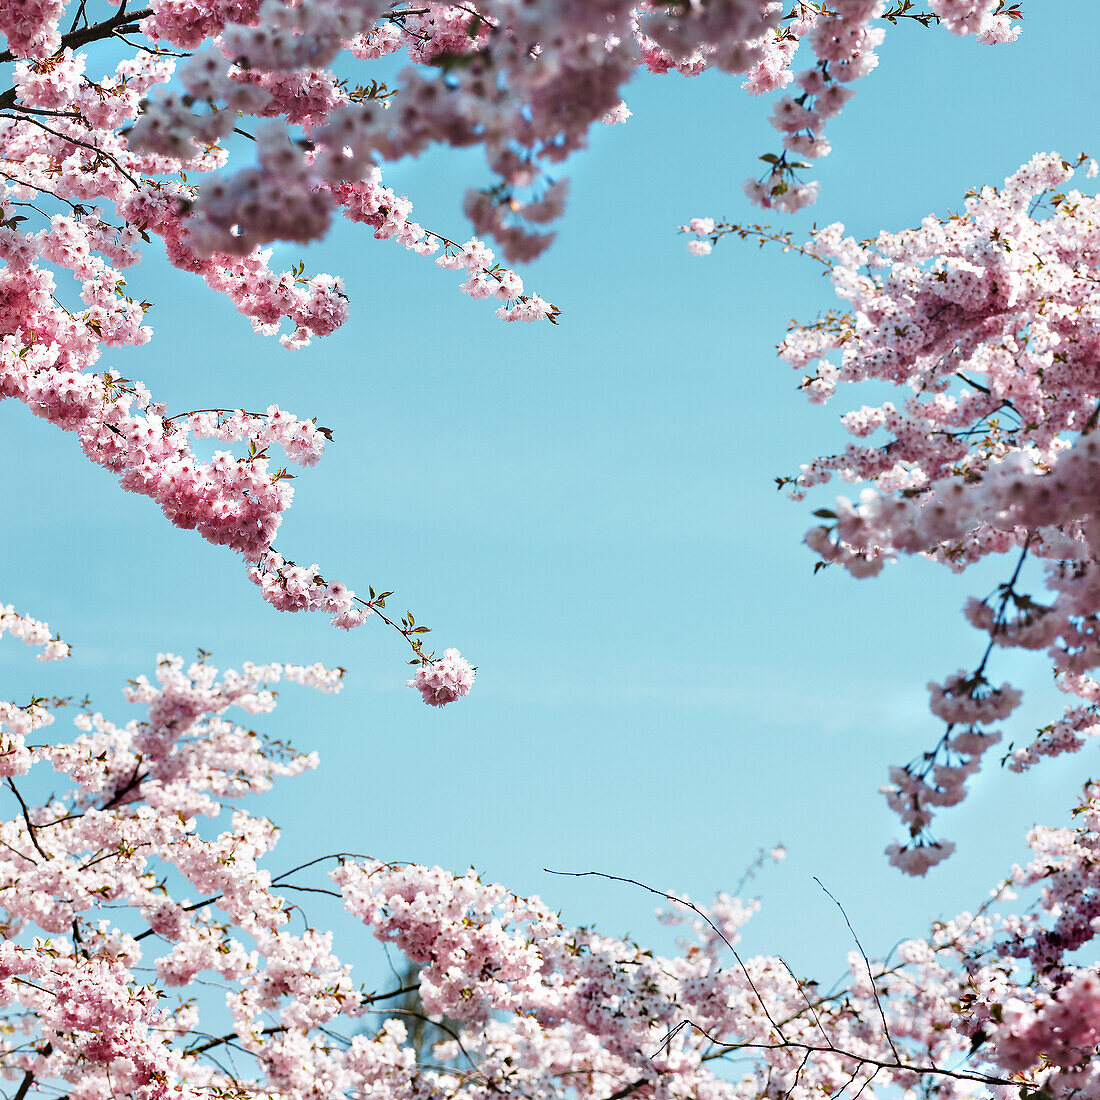 Pink cherry blossoms against blue sky. Pink cherry blossoms against blue sky